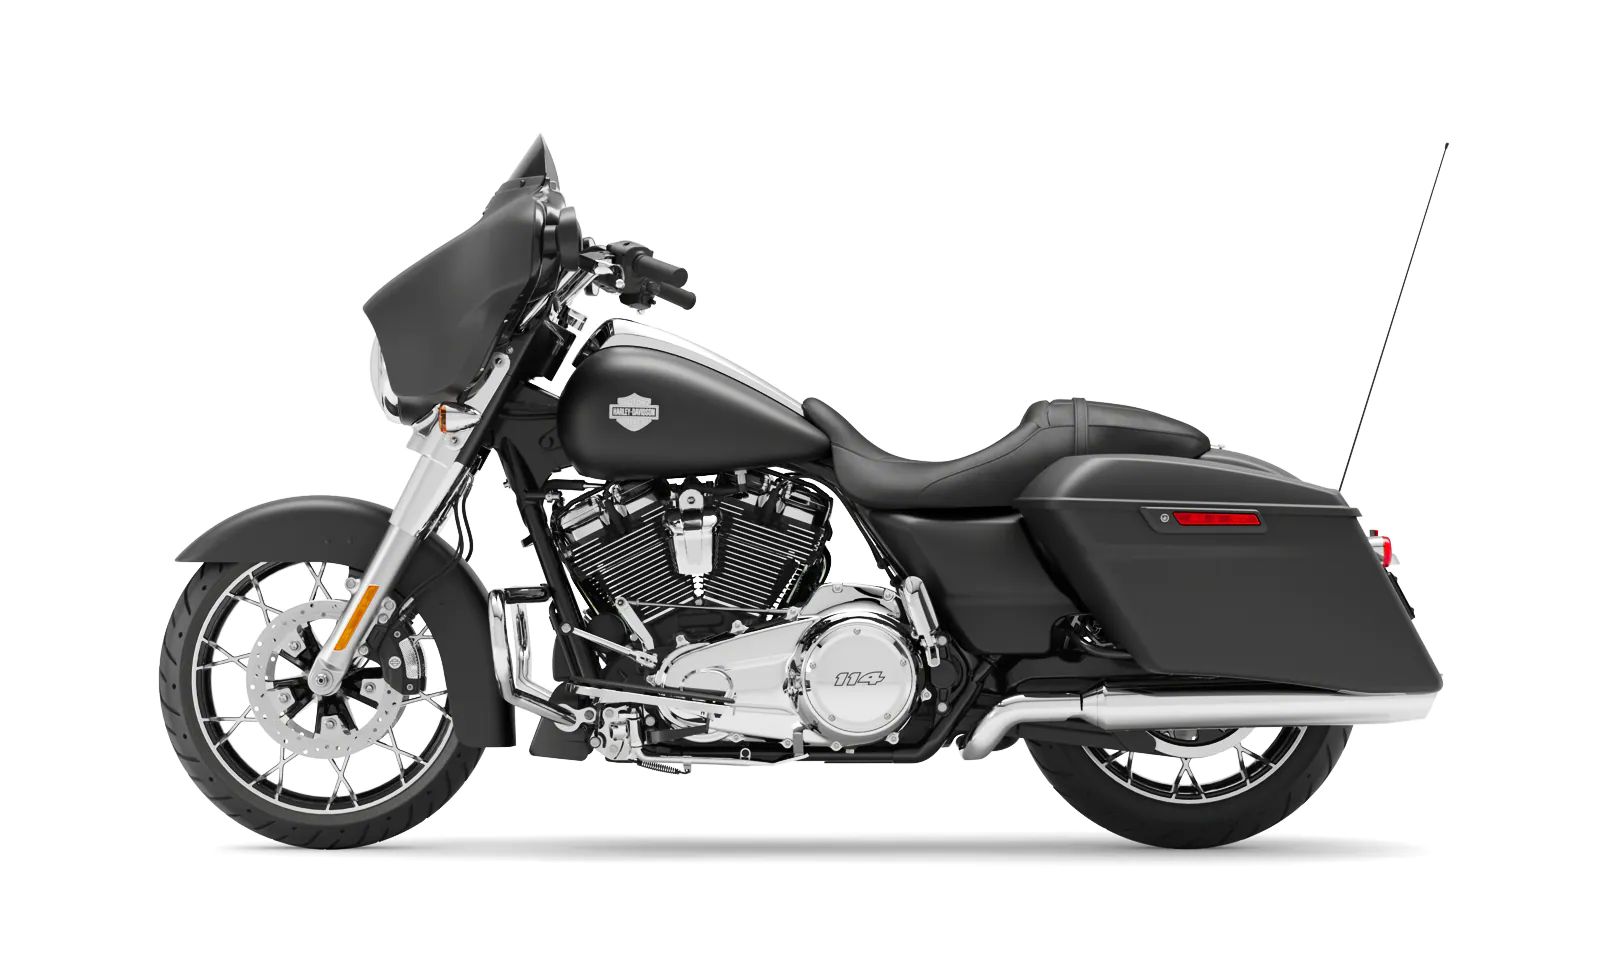 2022 Harley-Davidson Street Glide Special in New London, Connecticut - Photo 5